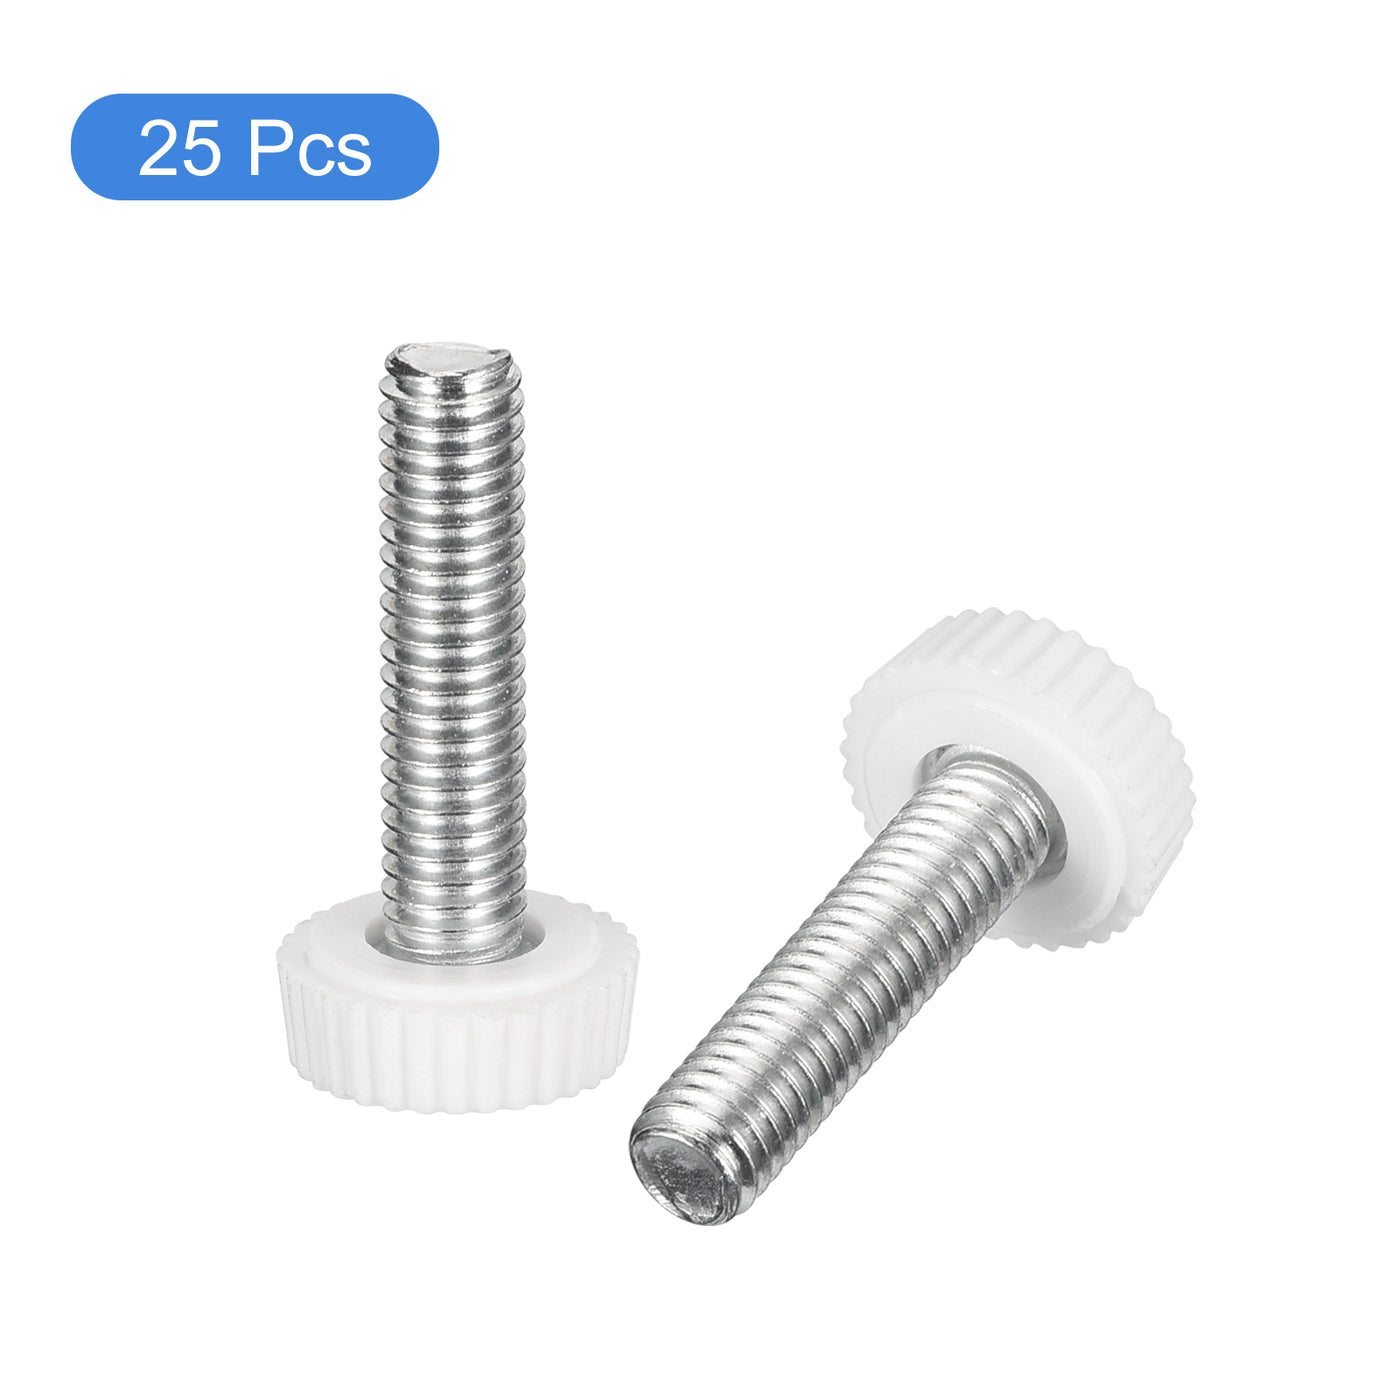 uxcell Uxcell 25Pcs M6x25mm Threaded Knurled Thumb Screws, Zinc Plated Carbon Steel White